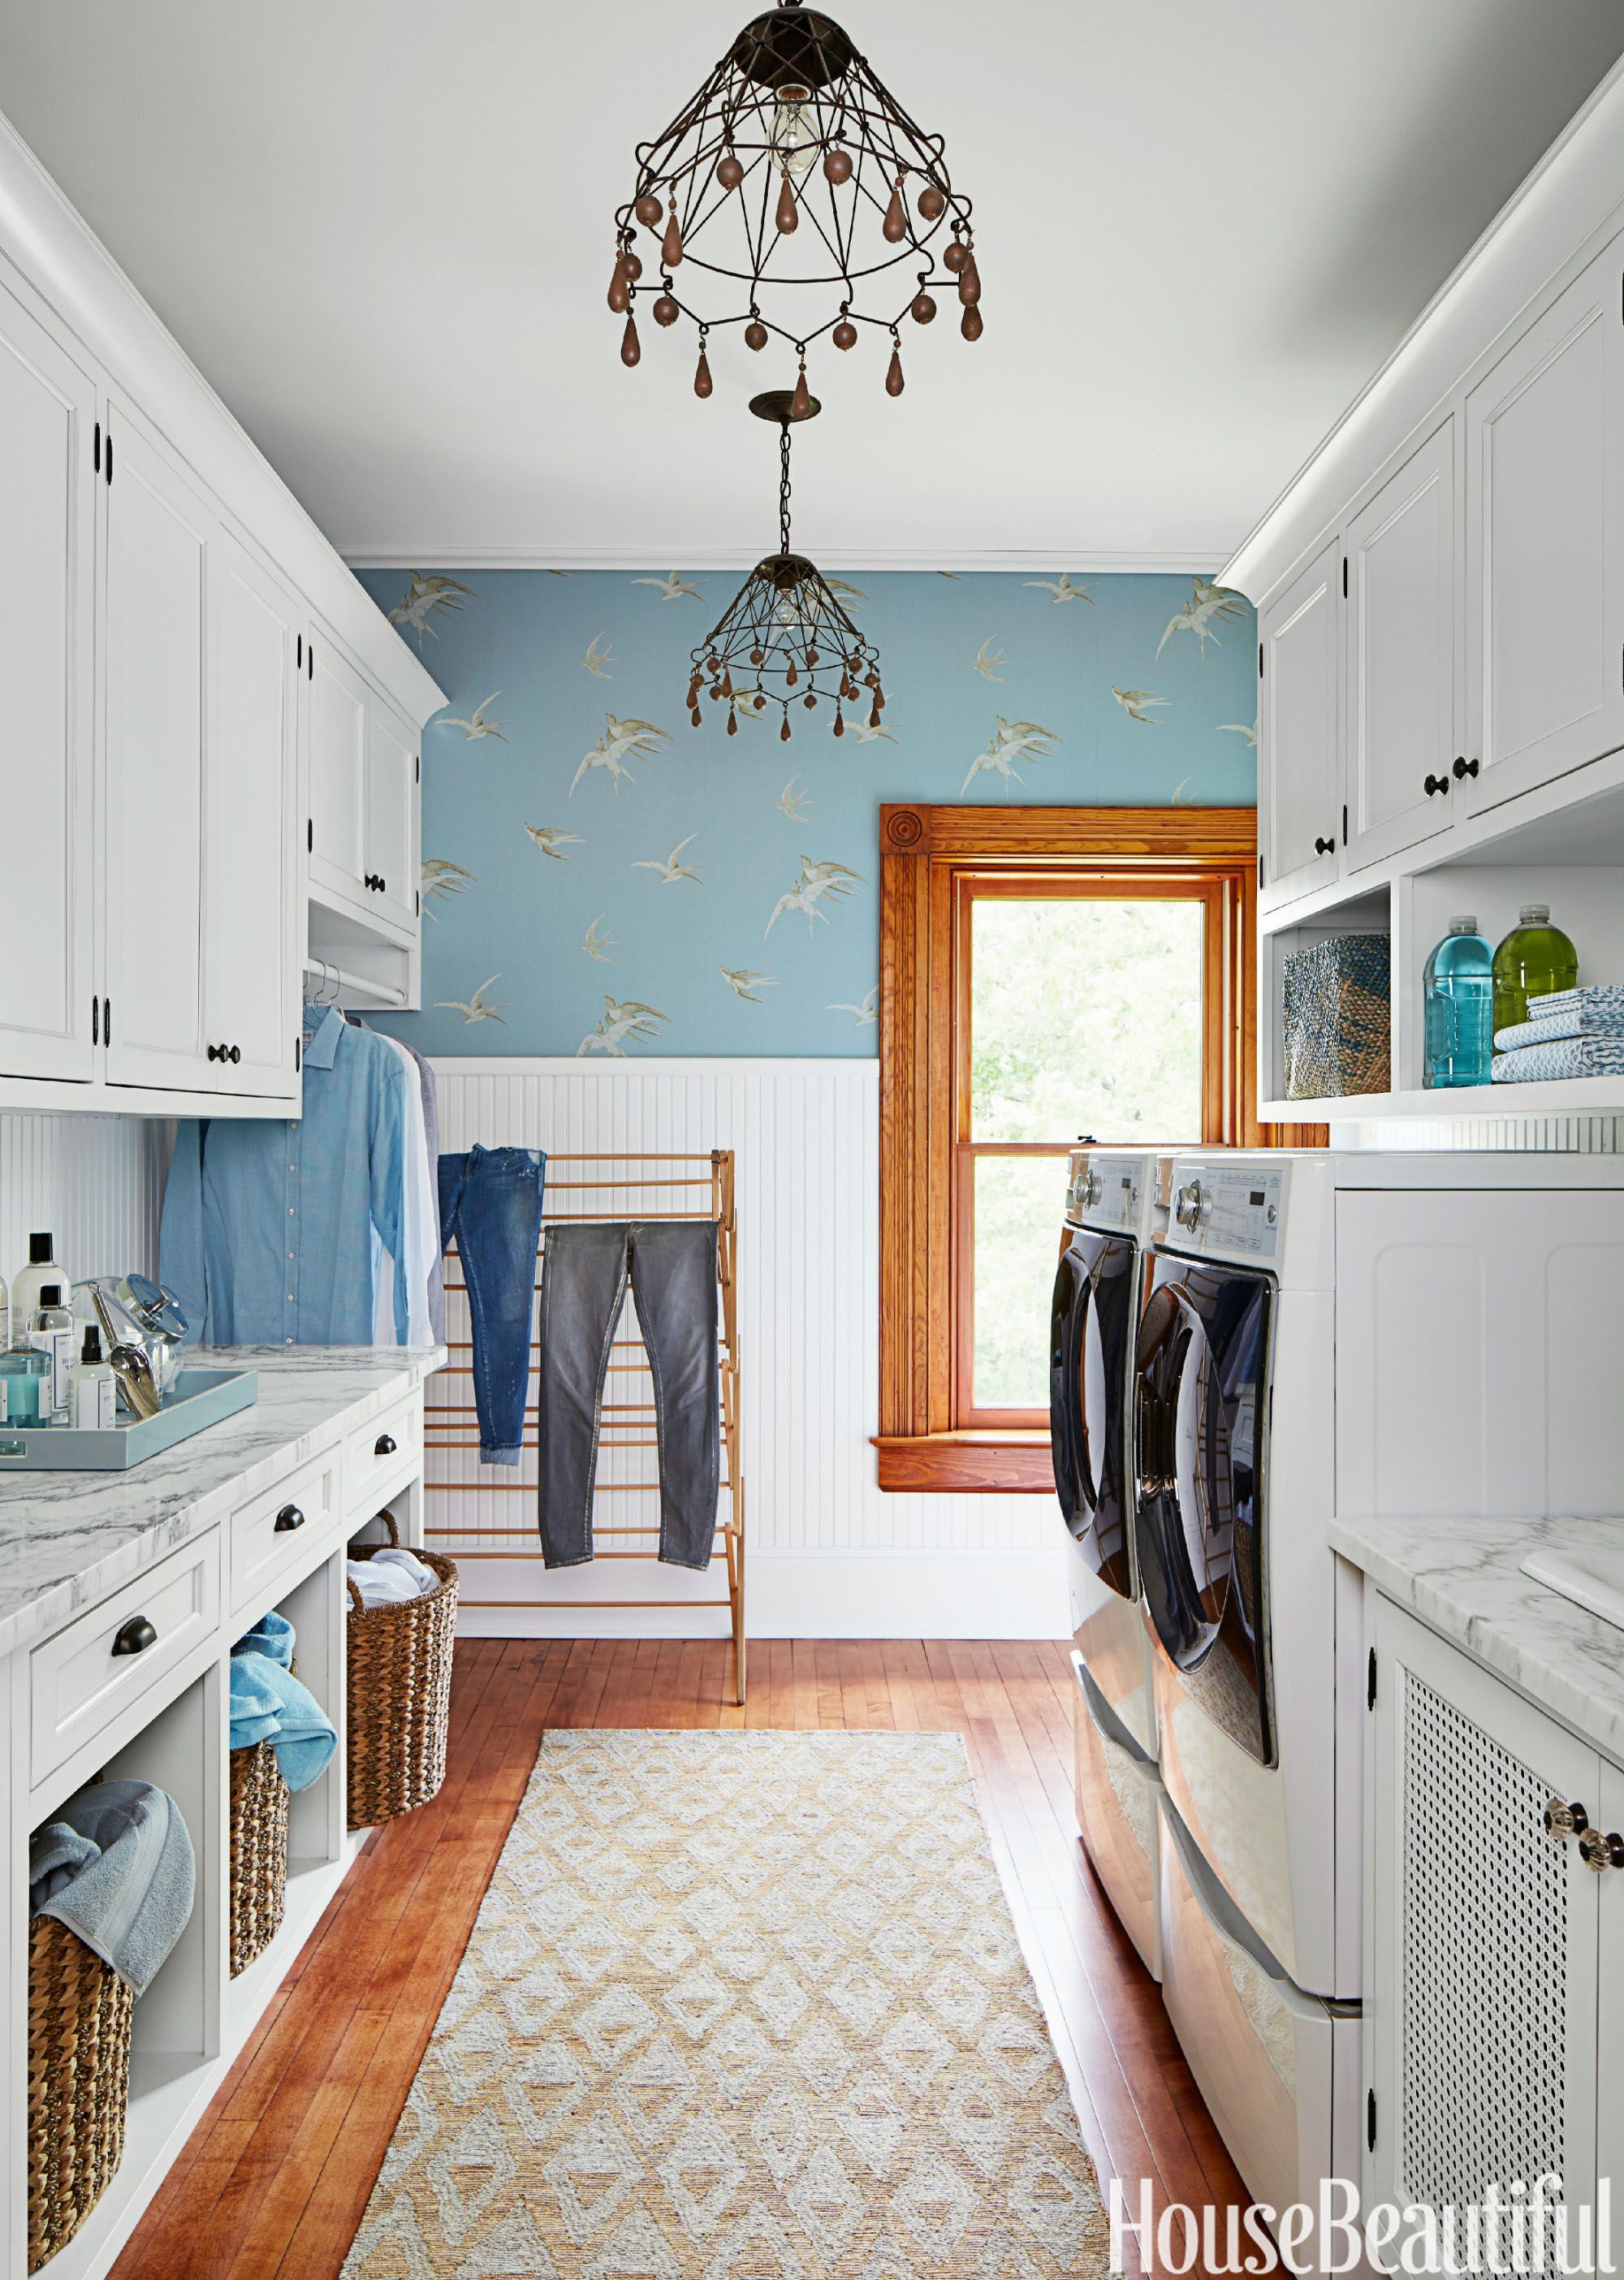 6 Ideas to Make a Small Laundry Room Work Better